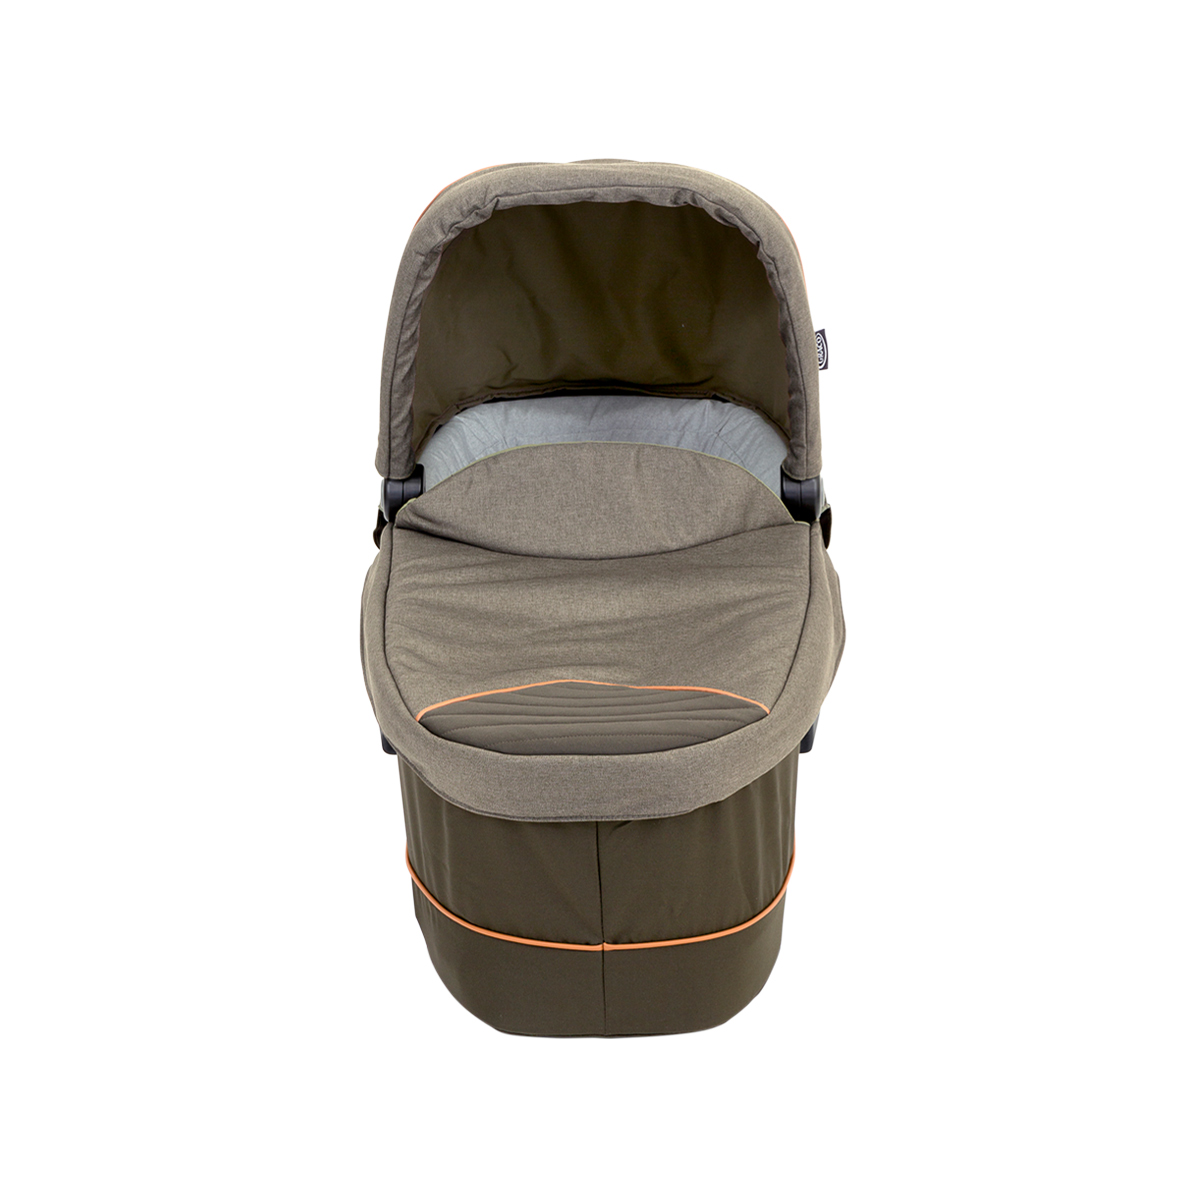 Graco Evo XT luxury carrycot front angle